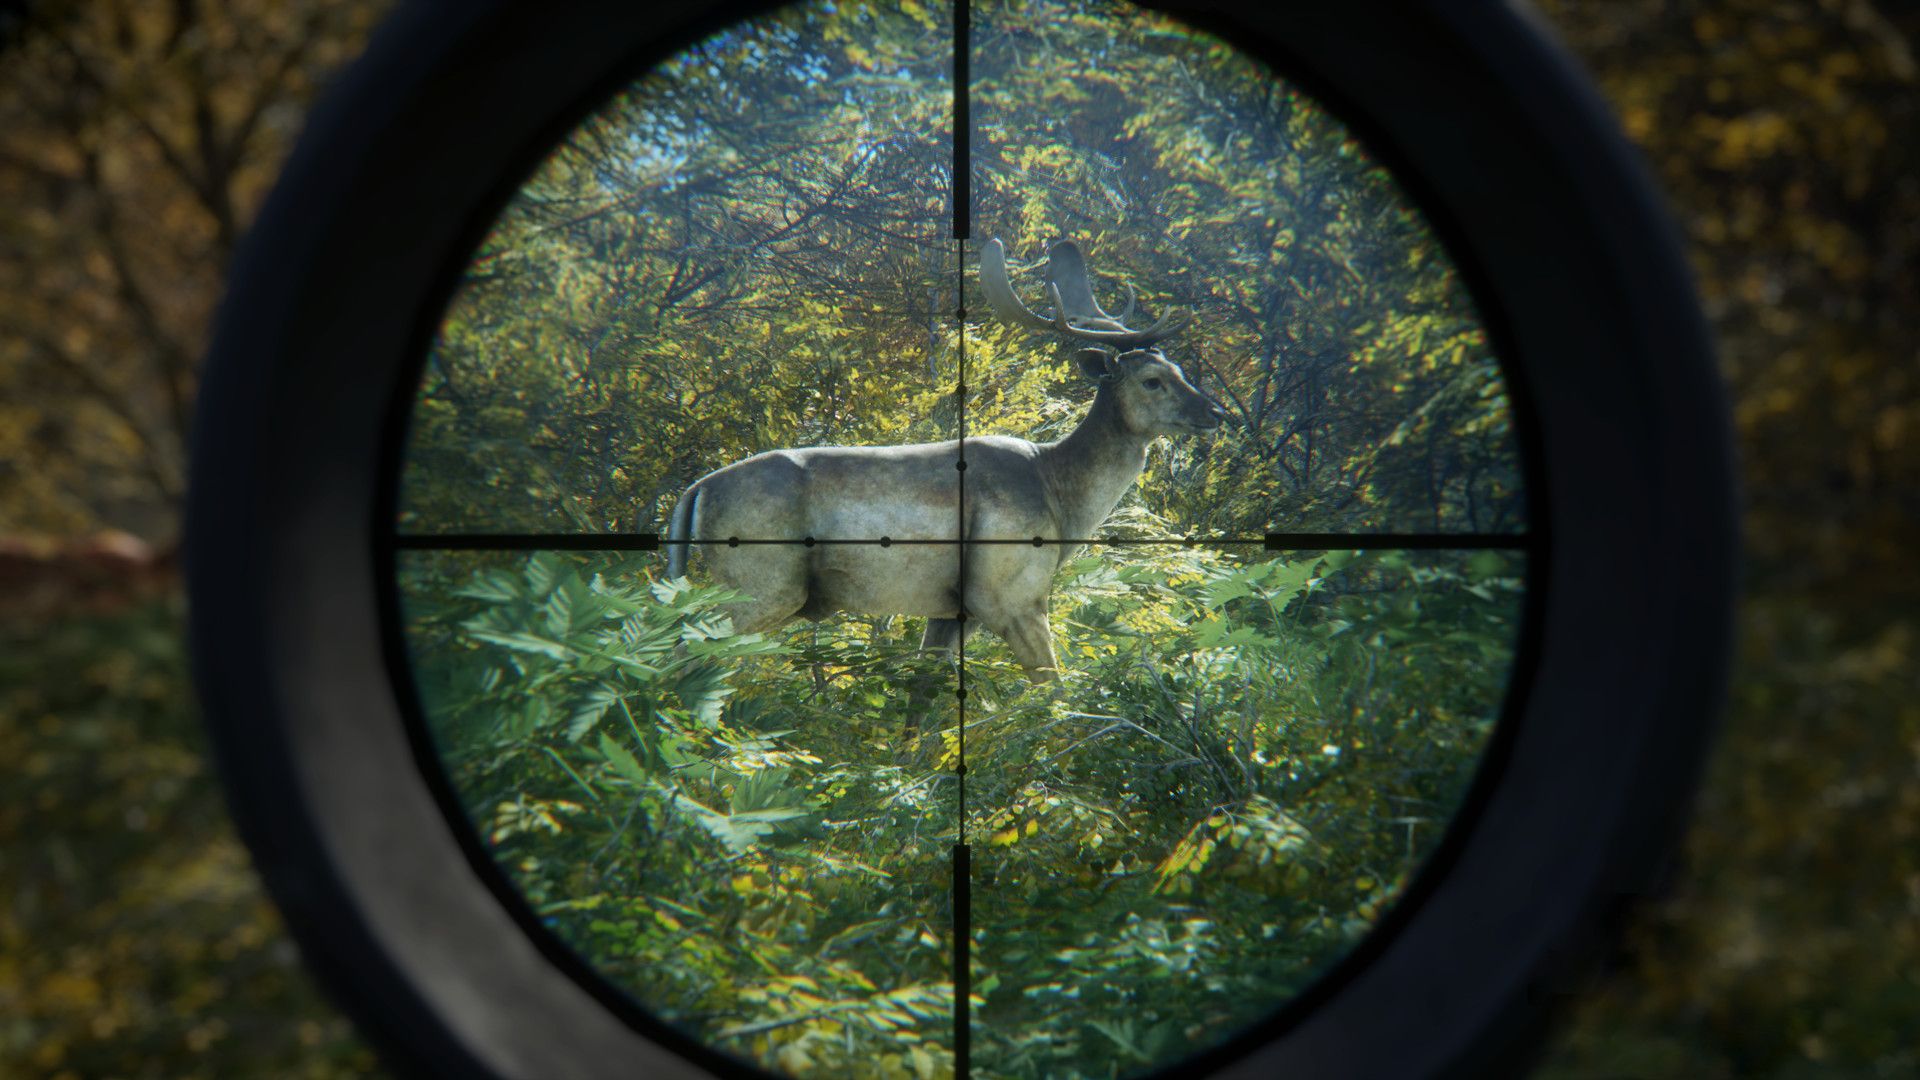 The Hunter: Call of the Wild - Where to Shoot?